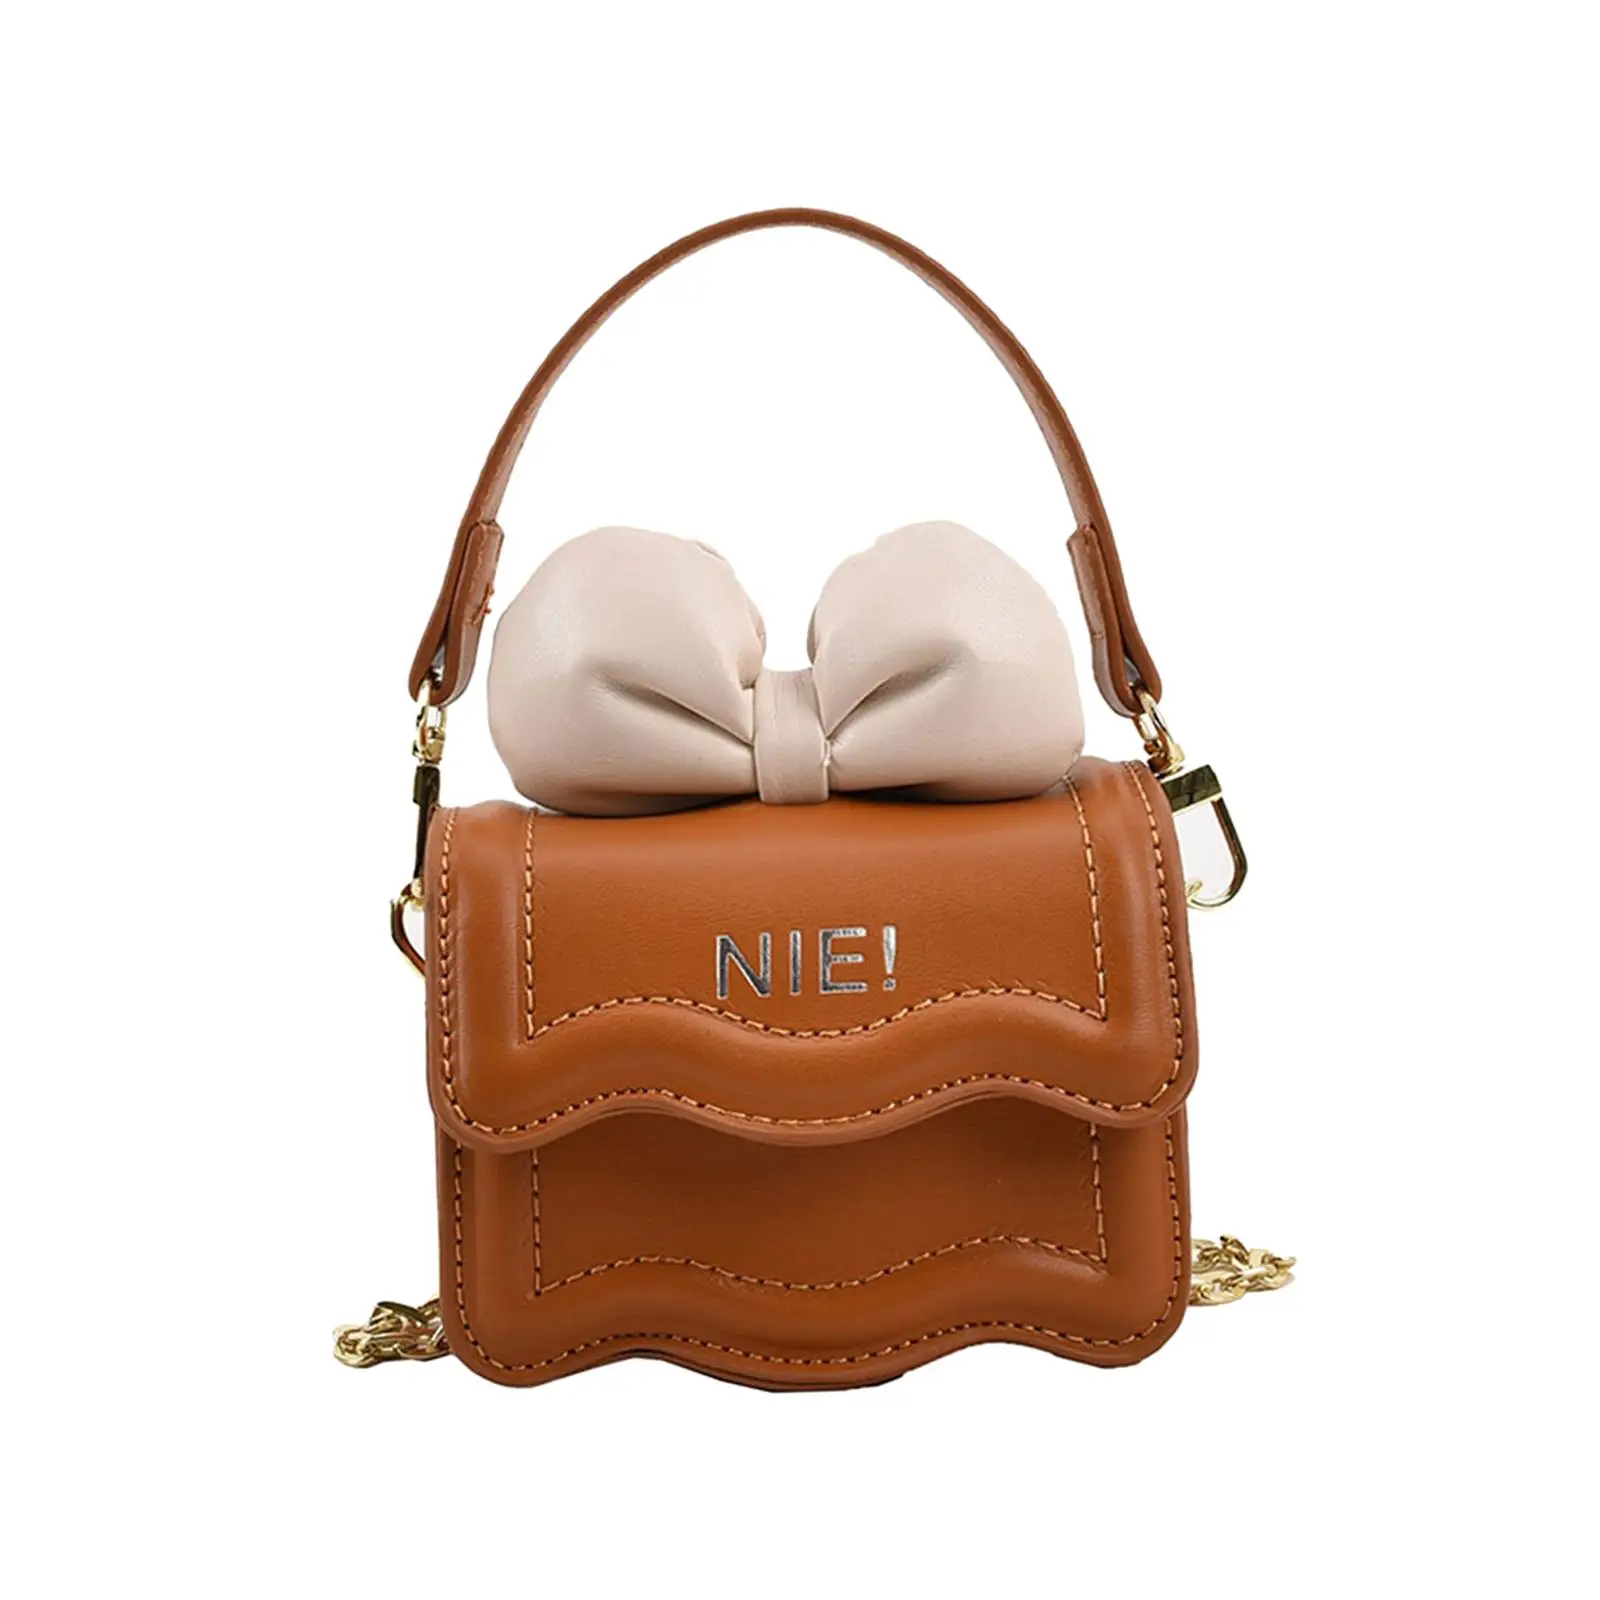 Women Shoulder Bag Chic Lightweight Pouch Gift Casual Ladies Handbag Mini Chain Bag for Traveling Spring Summer Outdoor Vacation